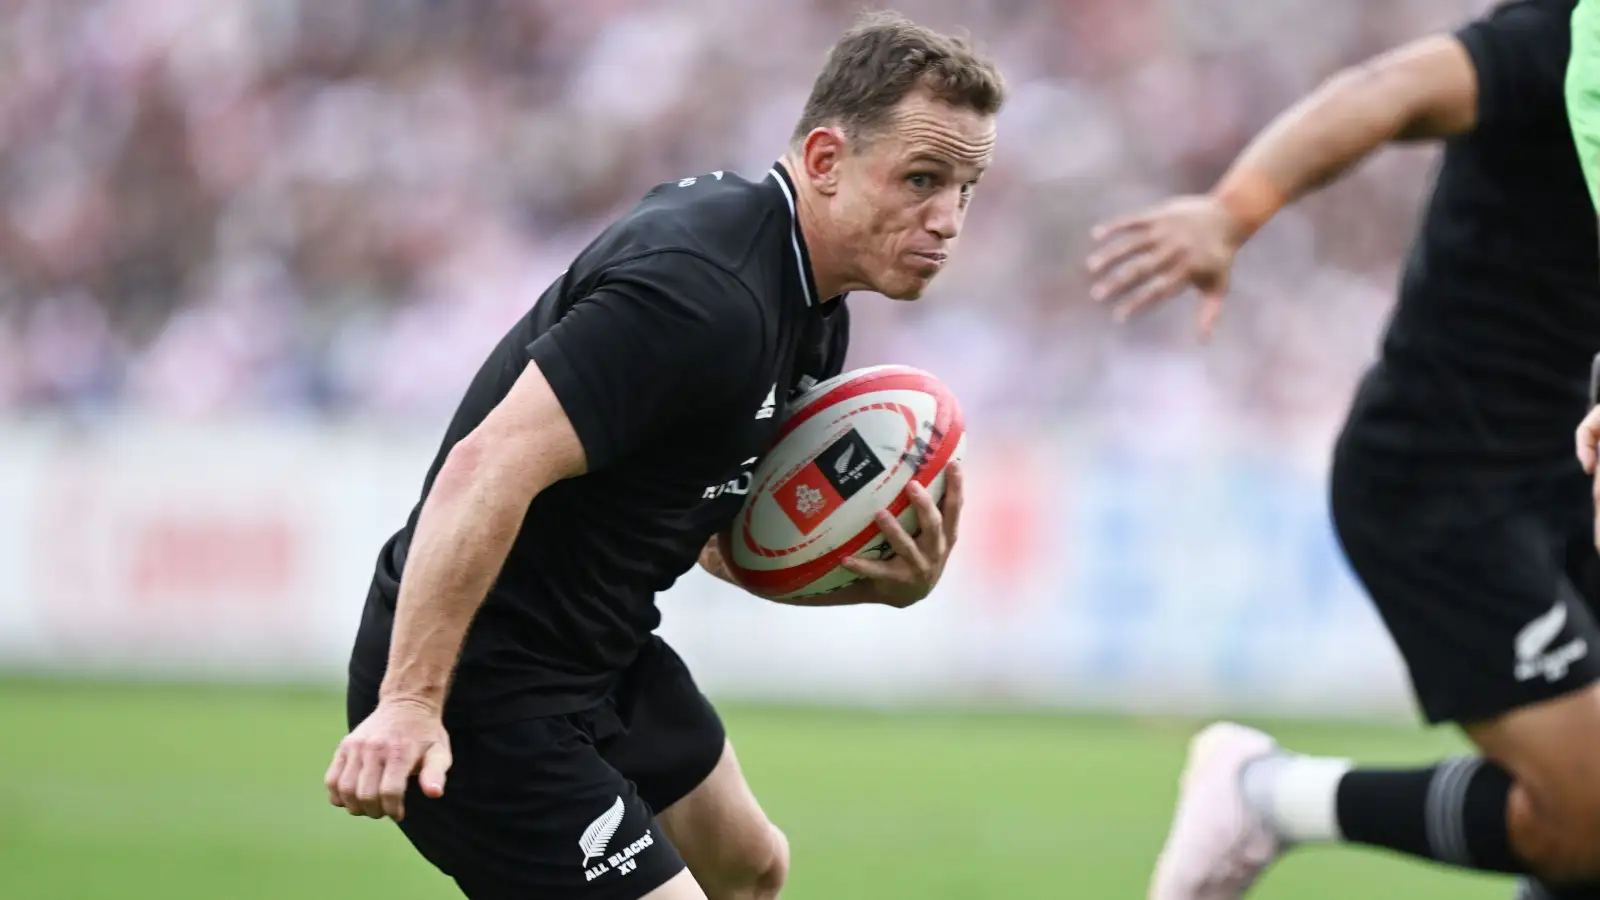 Ex-All Black believes New Zealand ‘could learn a thing or two’ from France : PlanetRugby